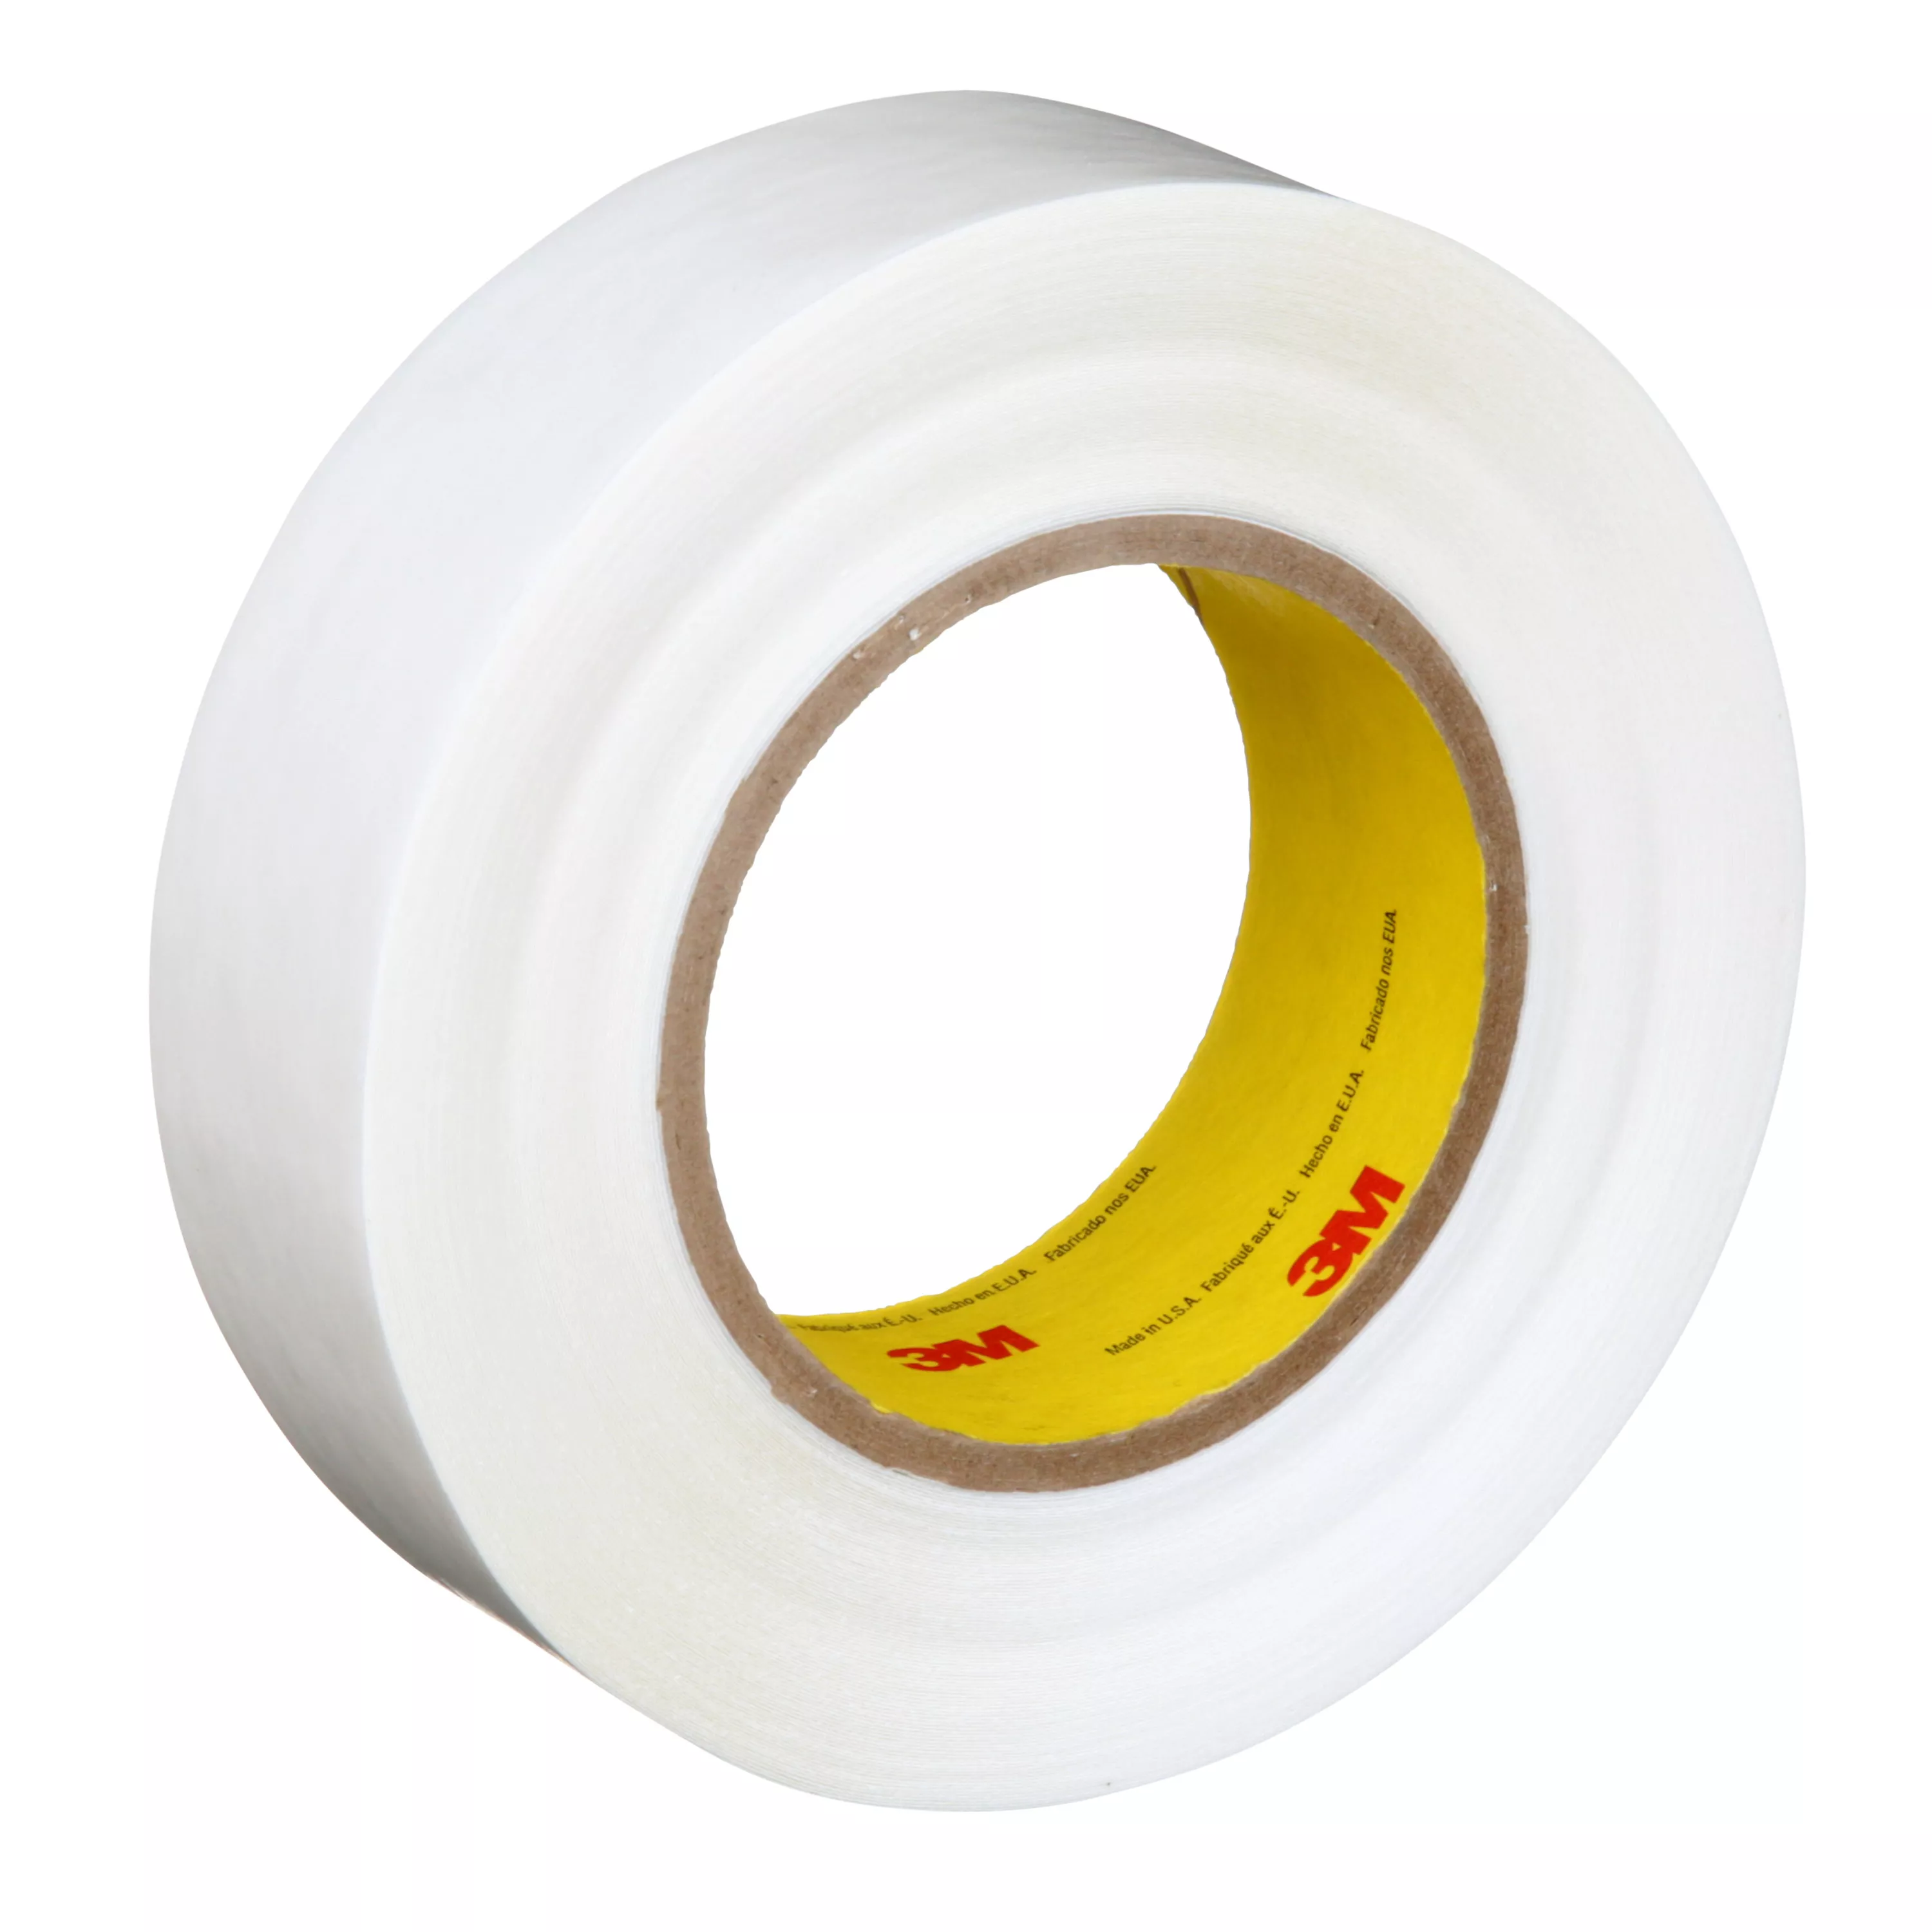 3M™ Double Coated Tape 9579, White, 1 1/2 in x 36 yd, 9 mil, 24
Roll/Case